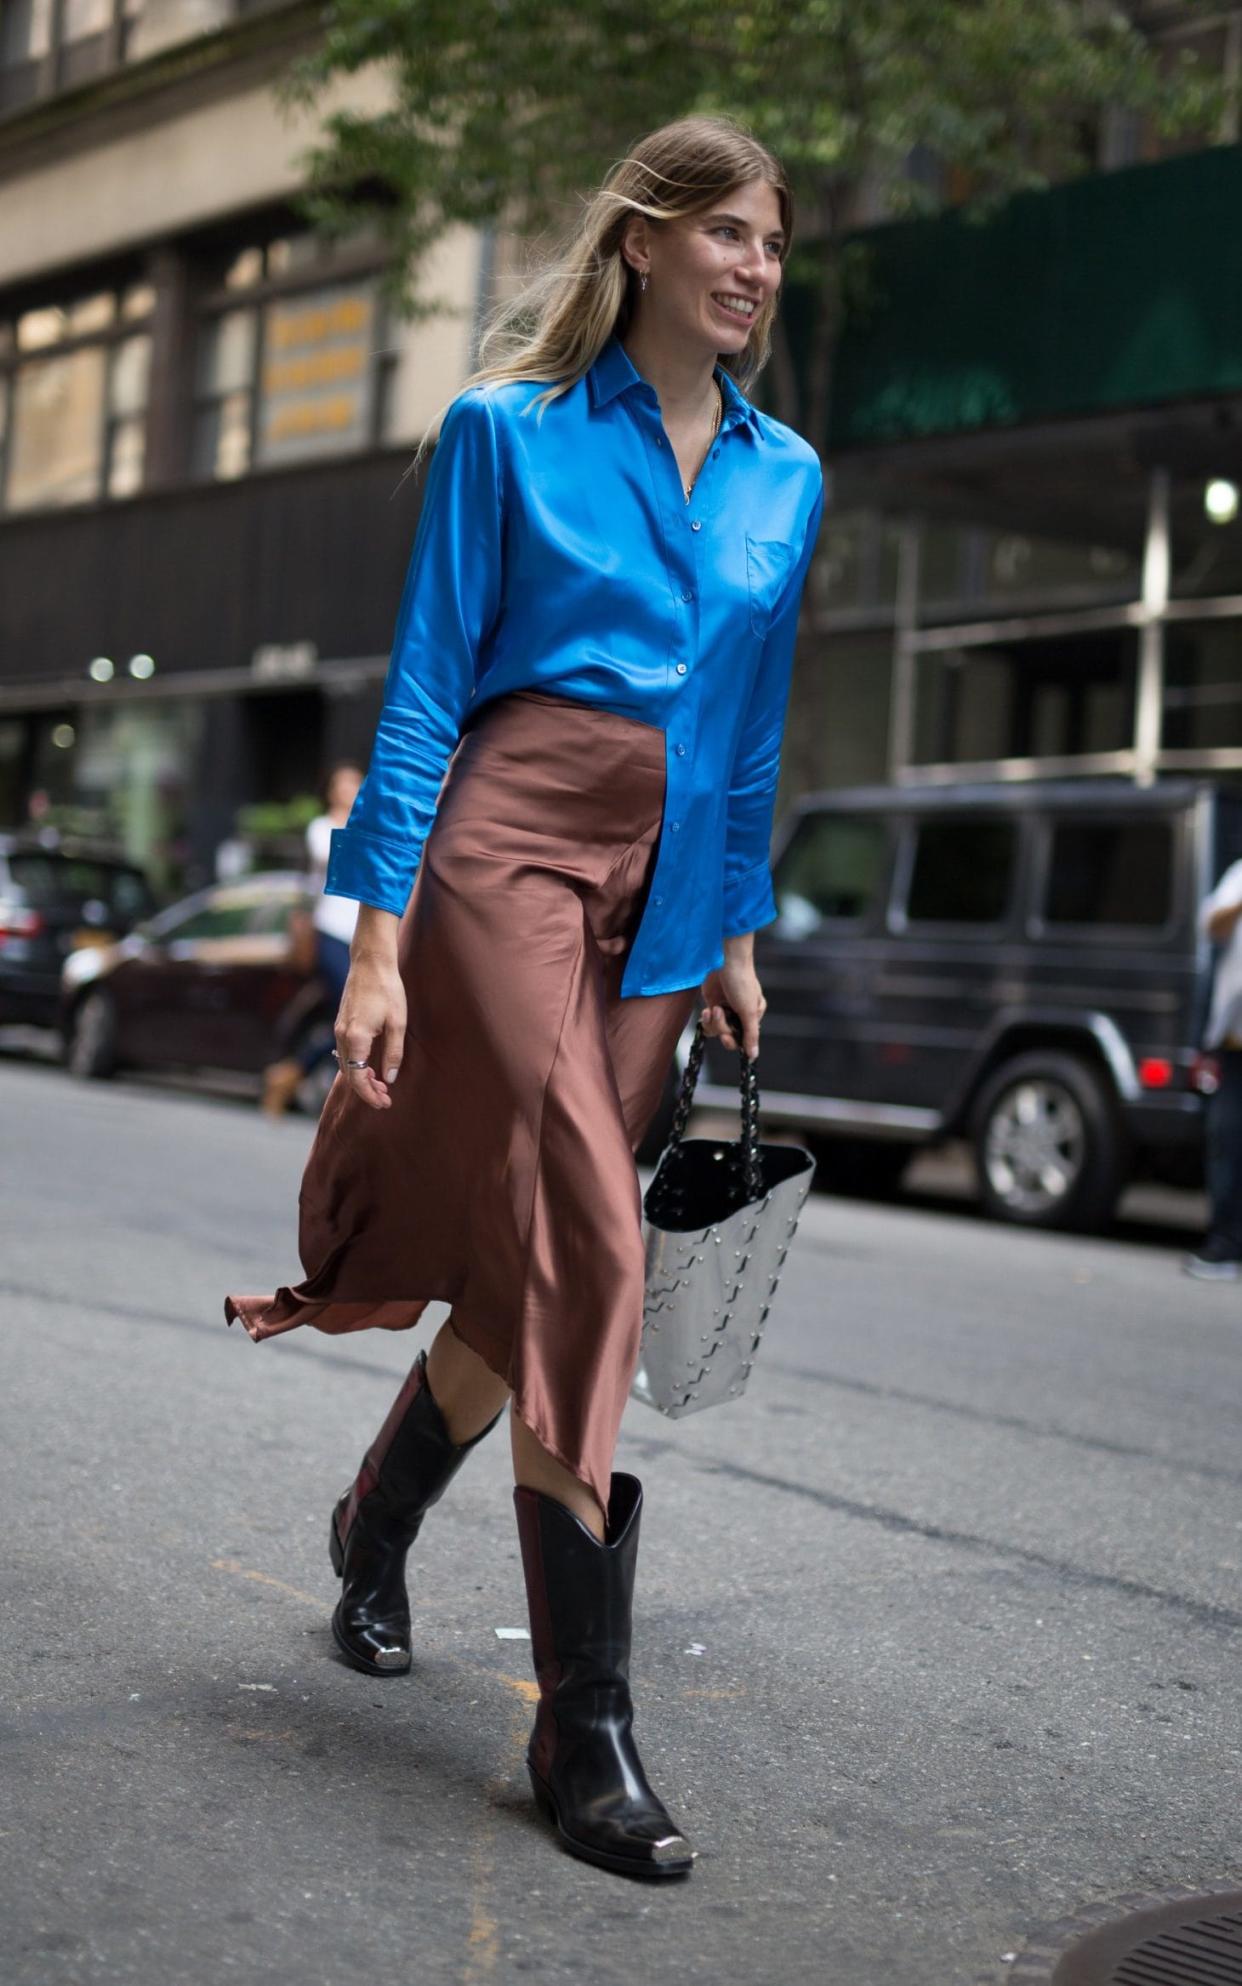 Founder of Hey Woman! Veronika Heilbrunner wears a silk shirt sans jacket while out and about in New York's warm September weather  - Getty Images North America